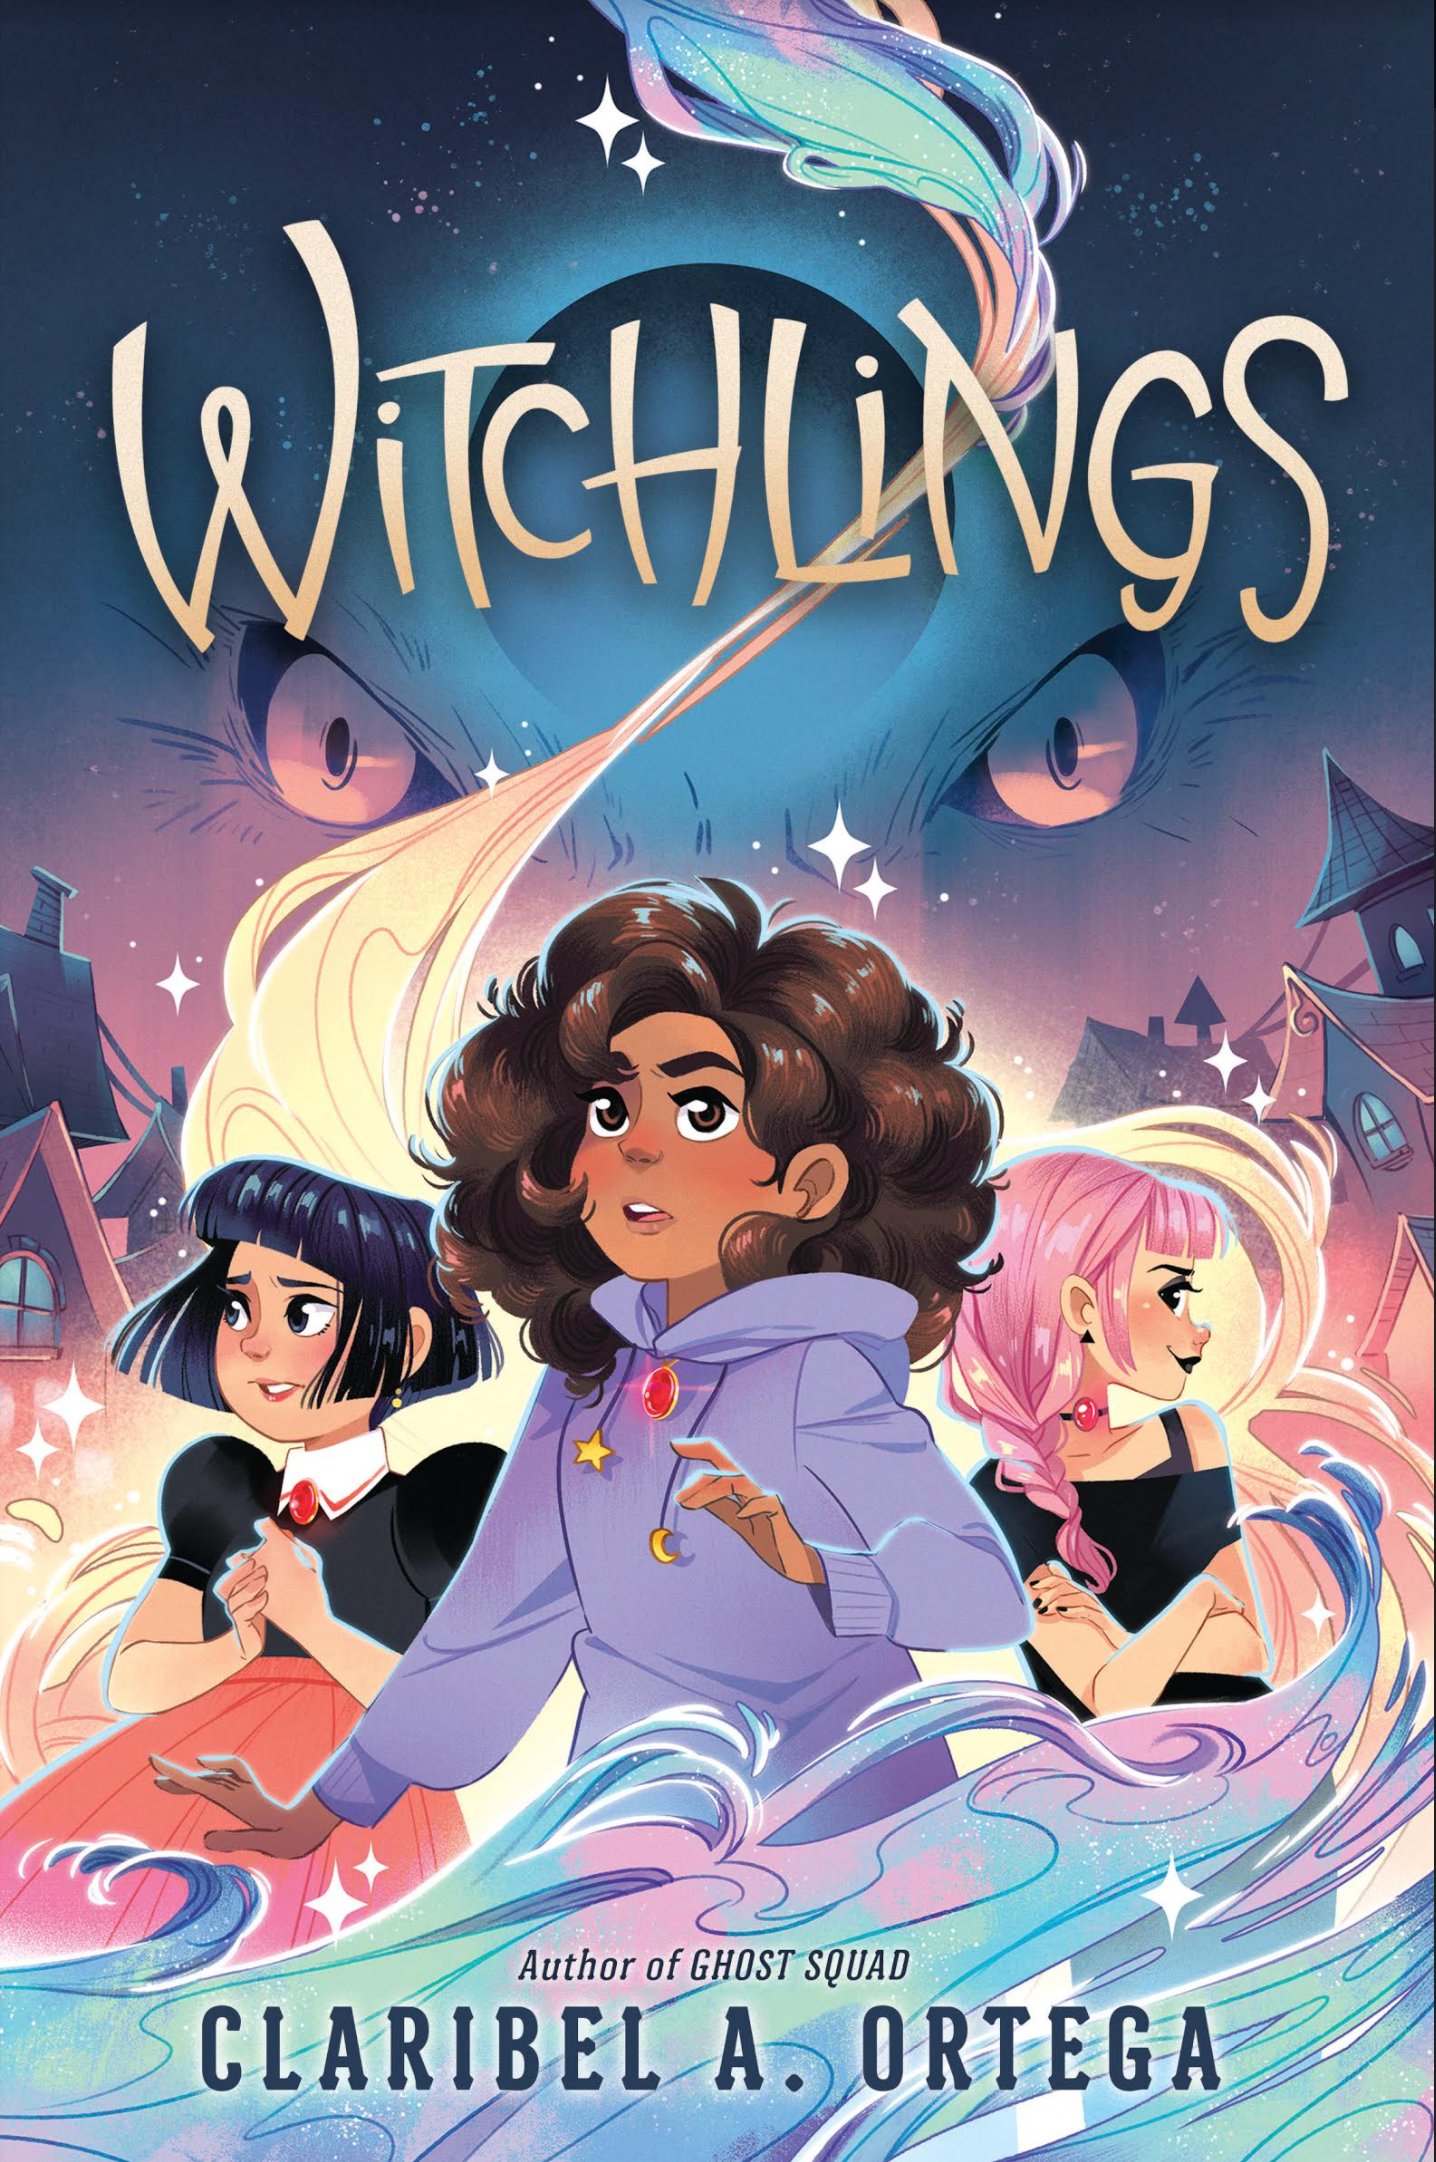 Witchlings (Witchlings, #1) books